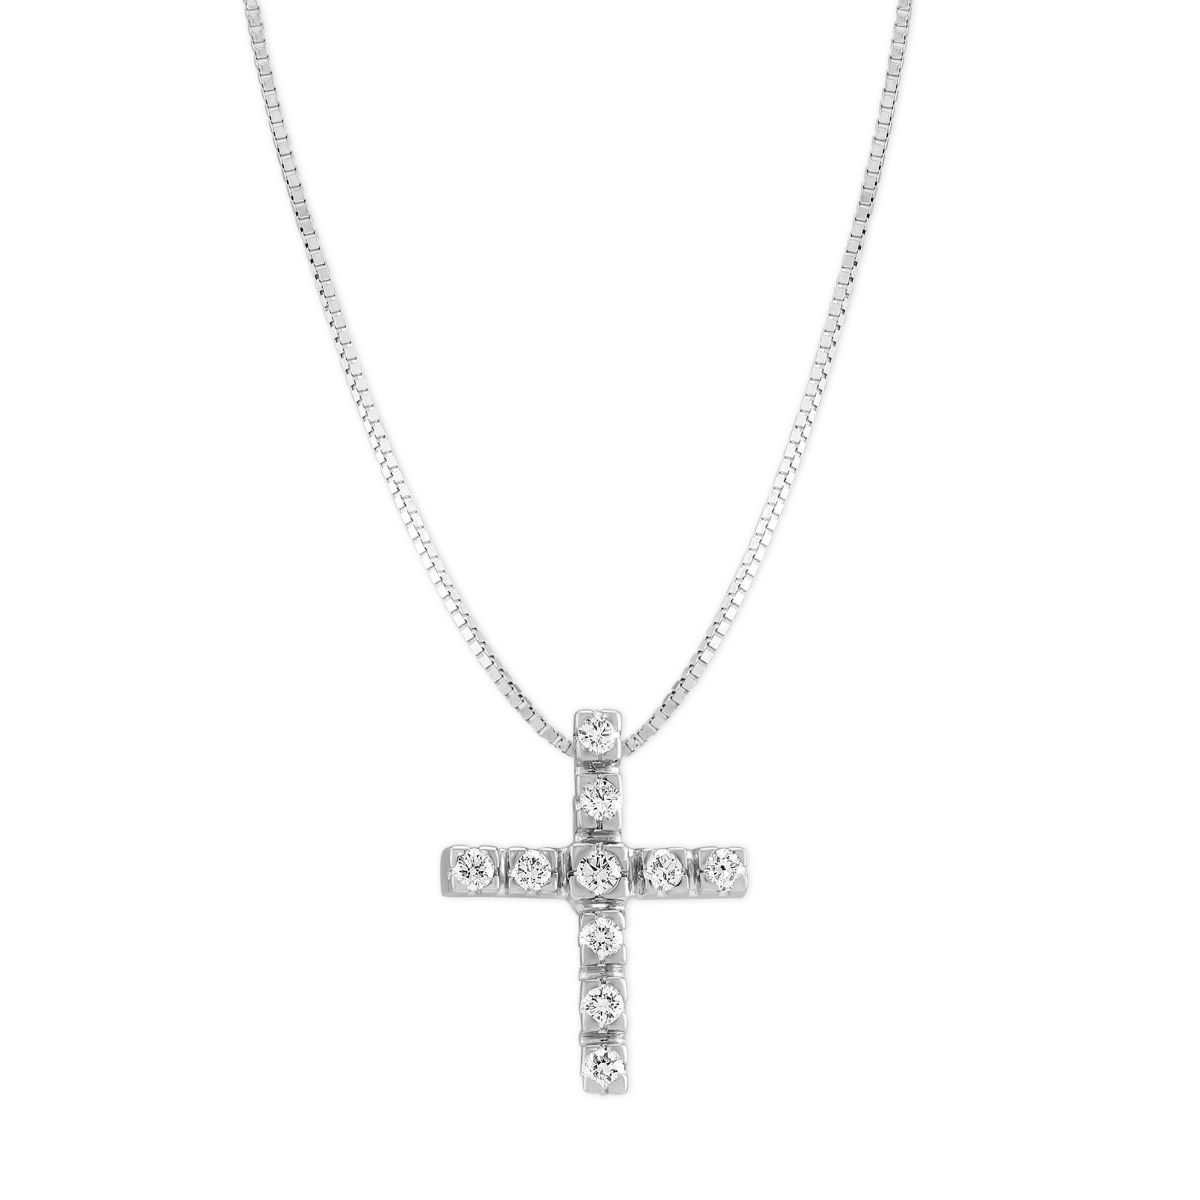 Diamond Cross Necklace in White Gold, 0.13 cttw | Borsheims